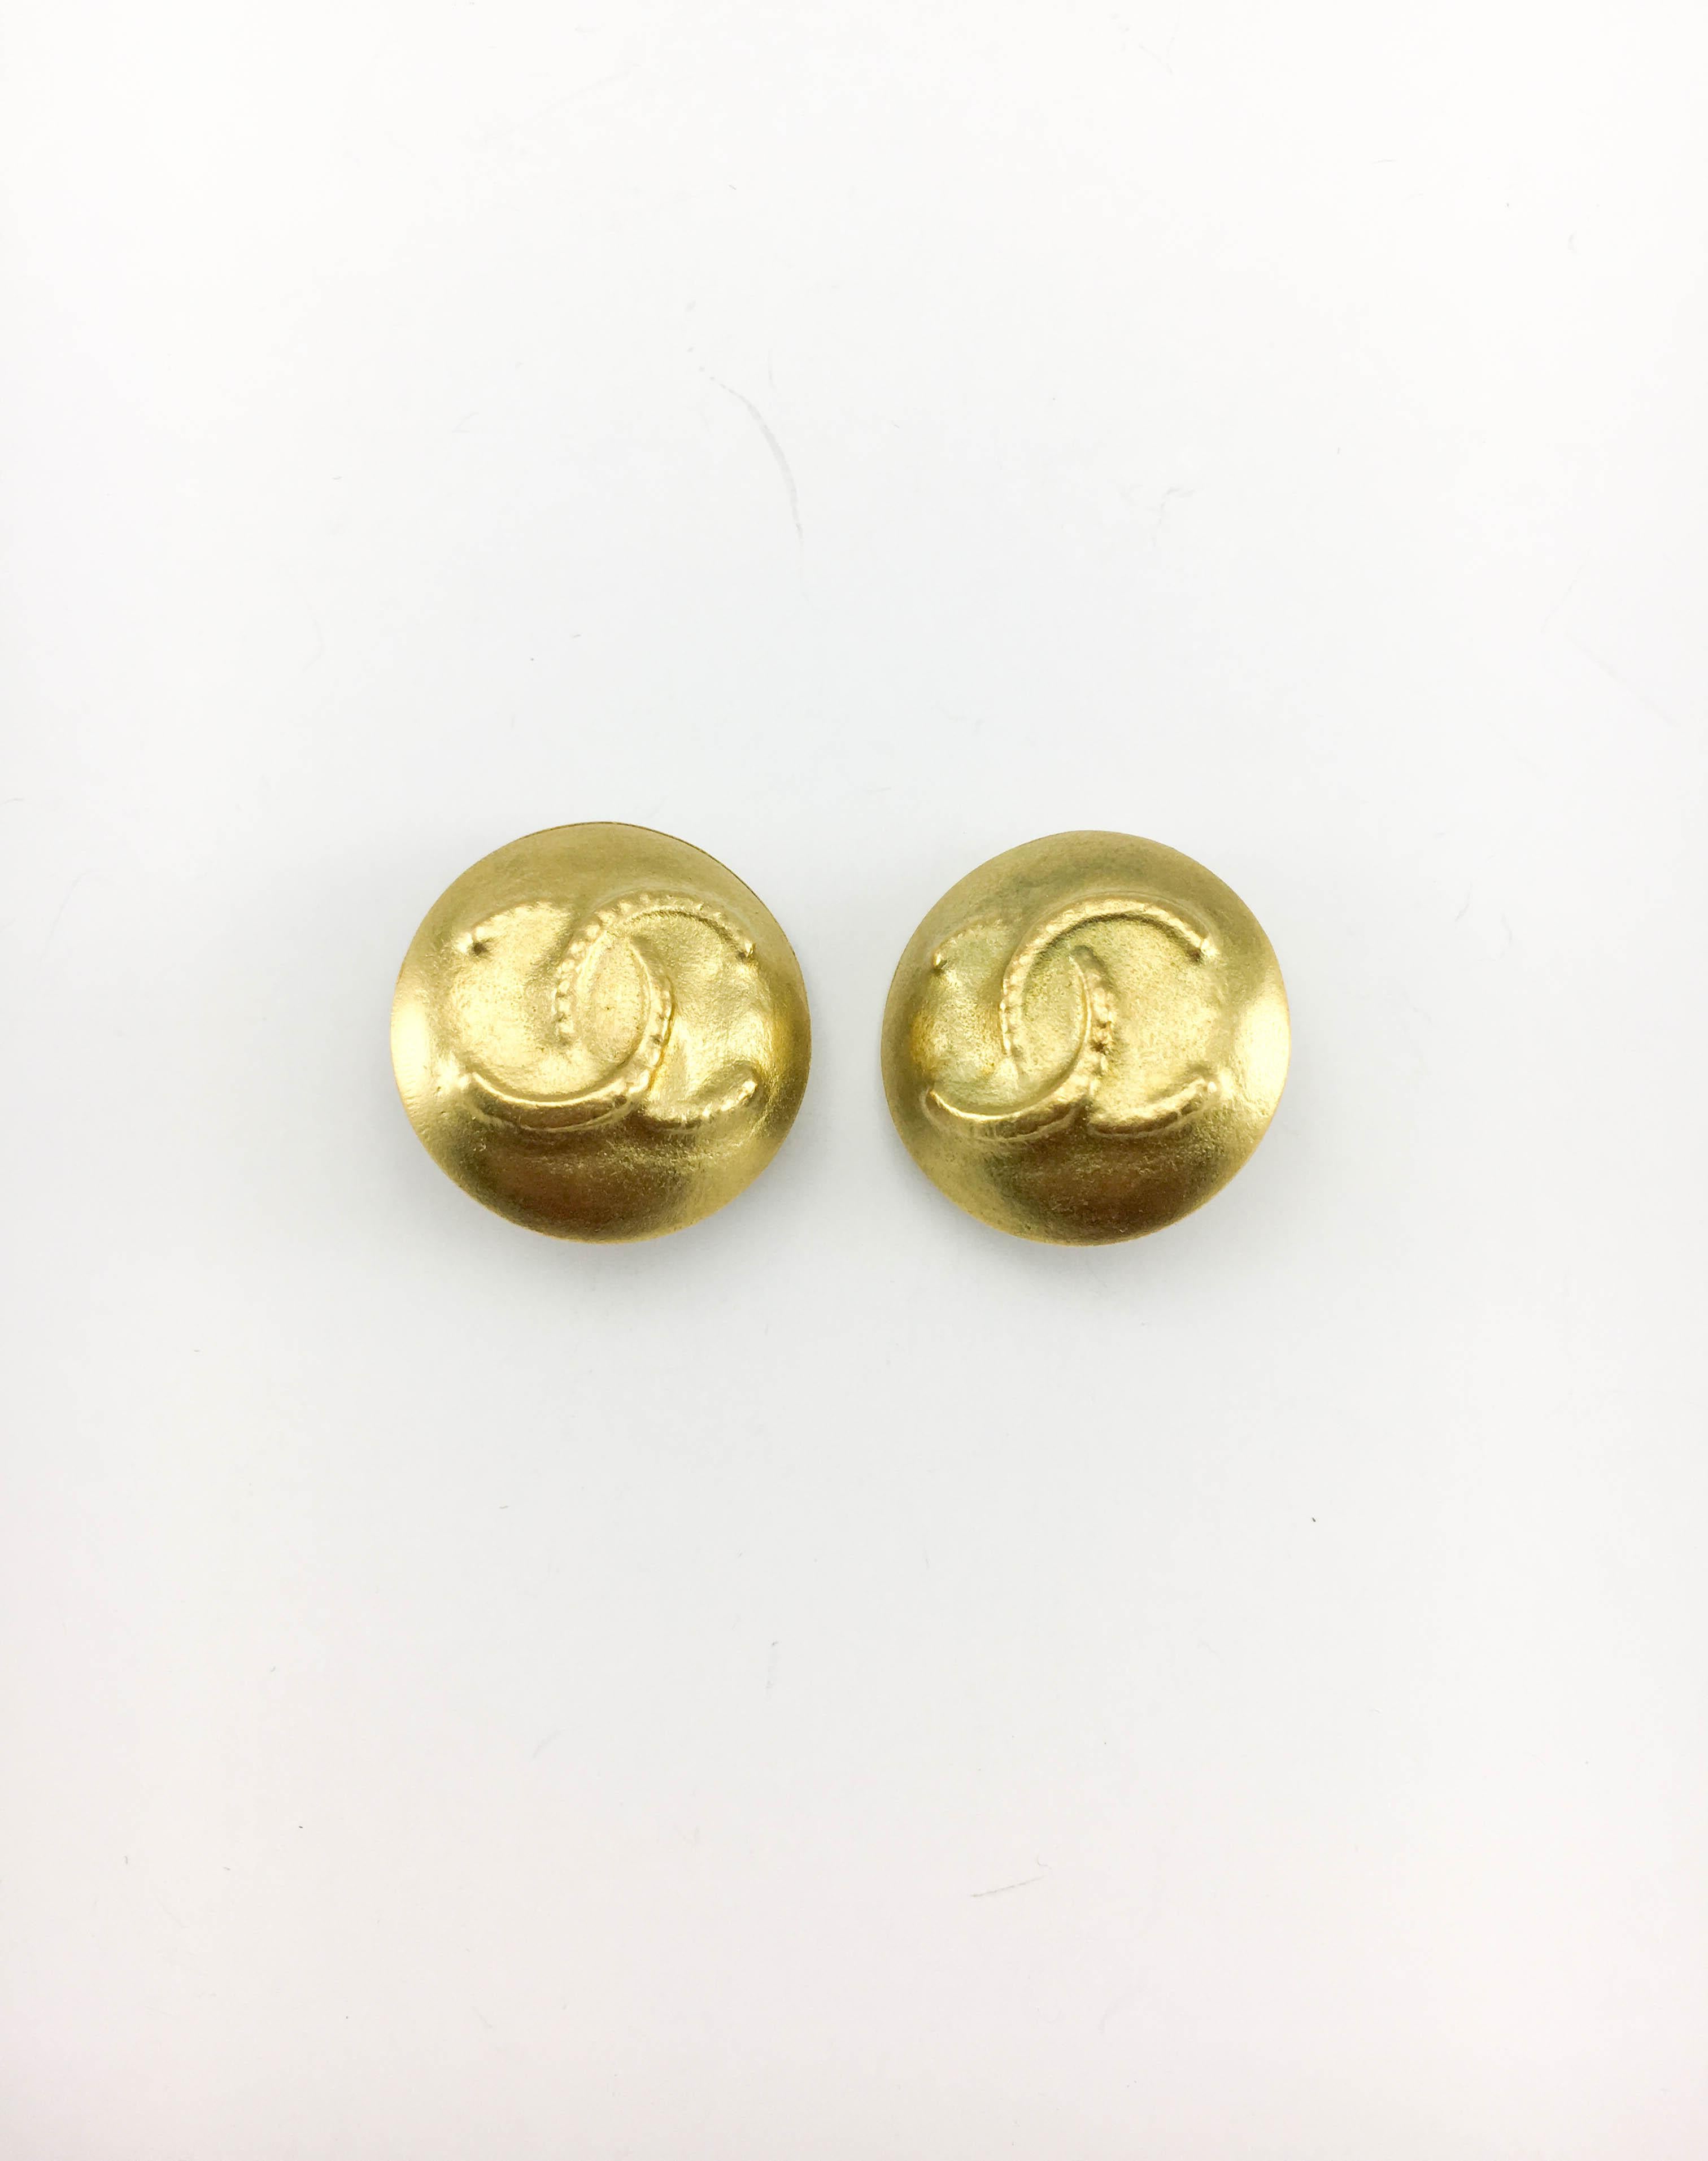 Vintage Chanel Gold-Tone Logo Clip-on Earrings. These lovely round earrings by Chanel were created for the 1995 Spring / Summer Collection. Gold-plated, they have a matte finish and feature the iconic ‘CC’ logo in the middle. Chanel signed on the